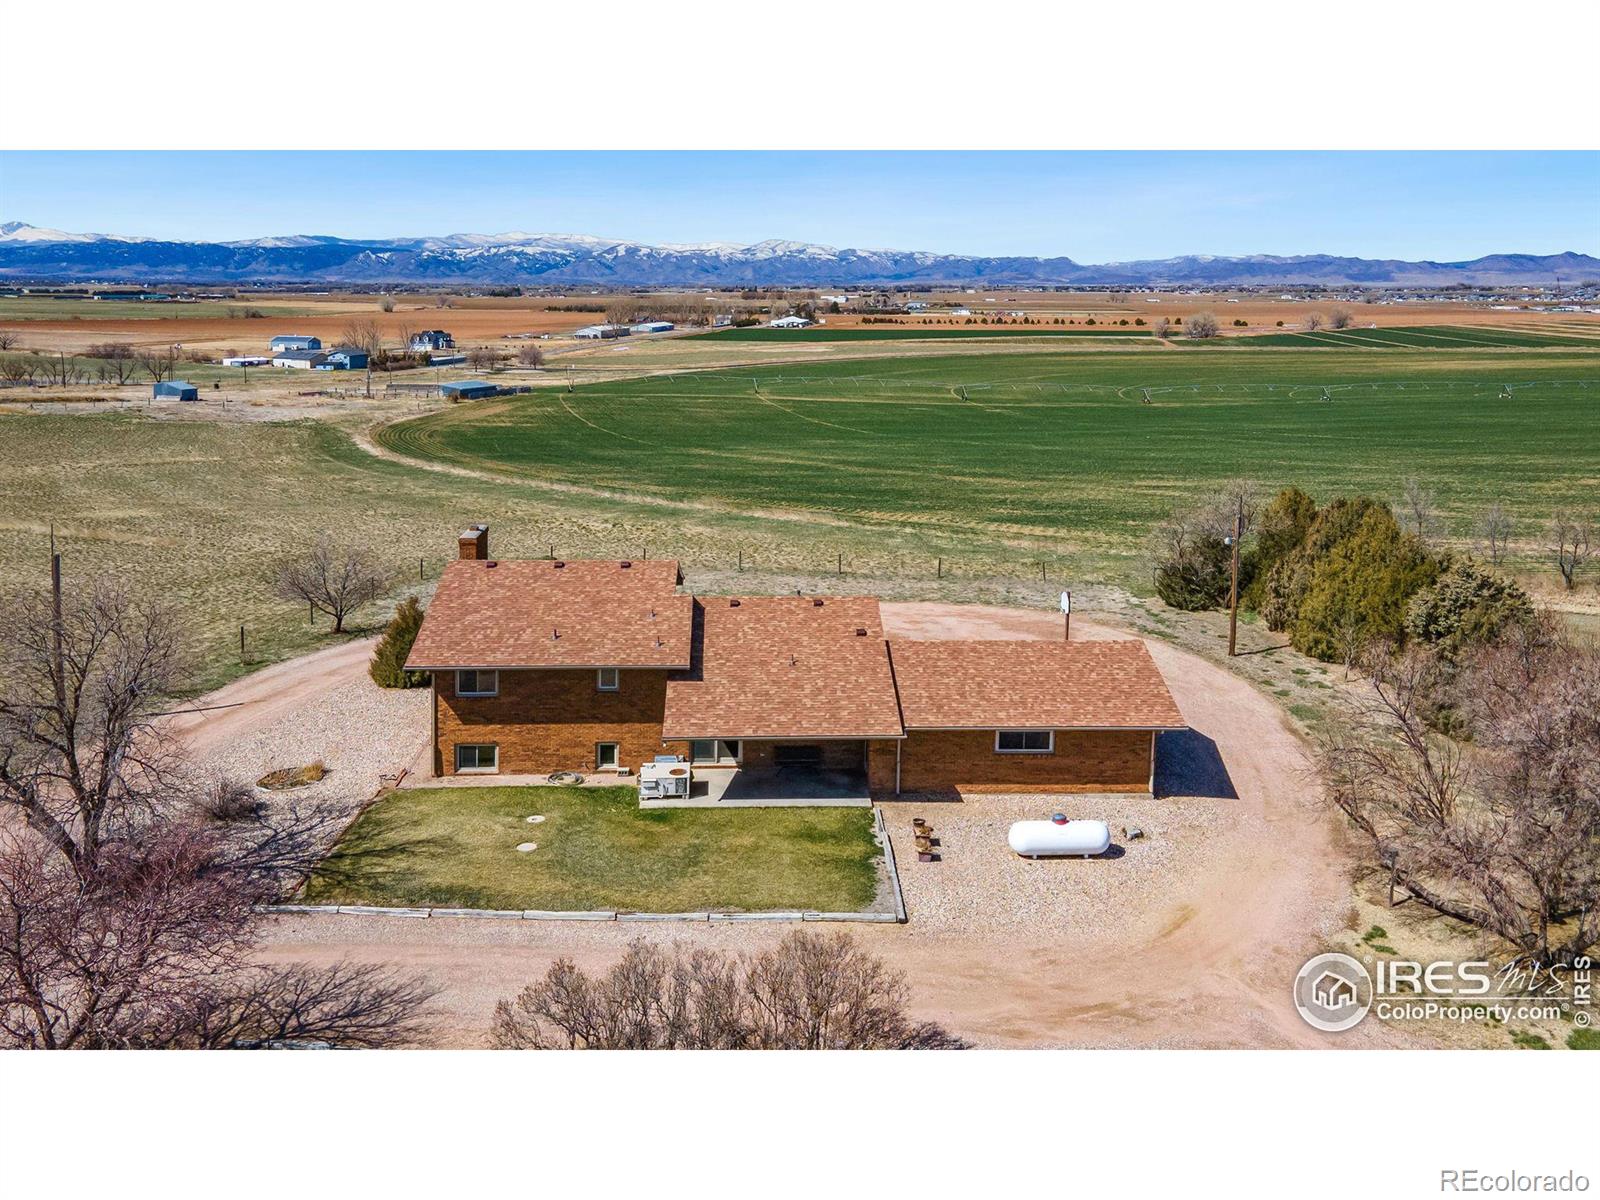 5520 E County Road 58 , fort collins MLS: 4567891006447 Beds: 5 Baths: 2 Price: $945,000